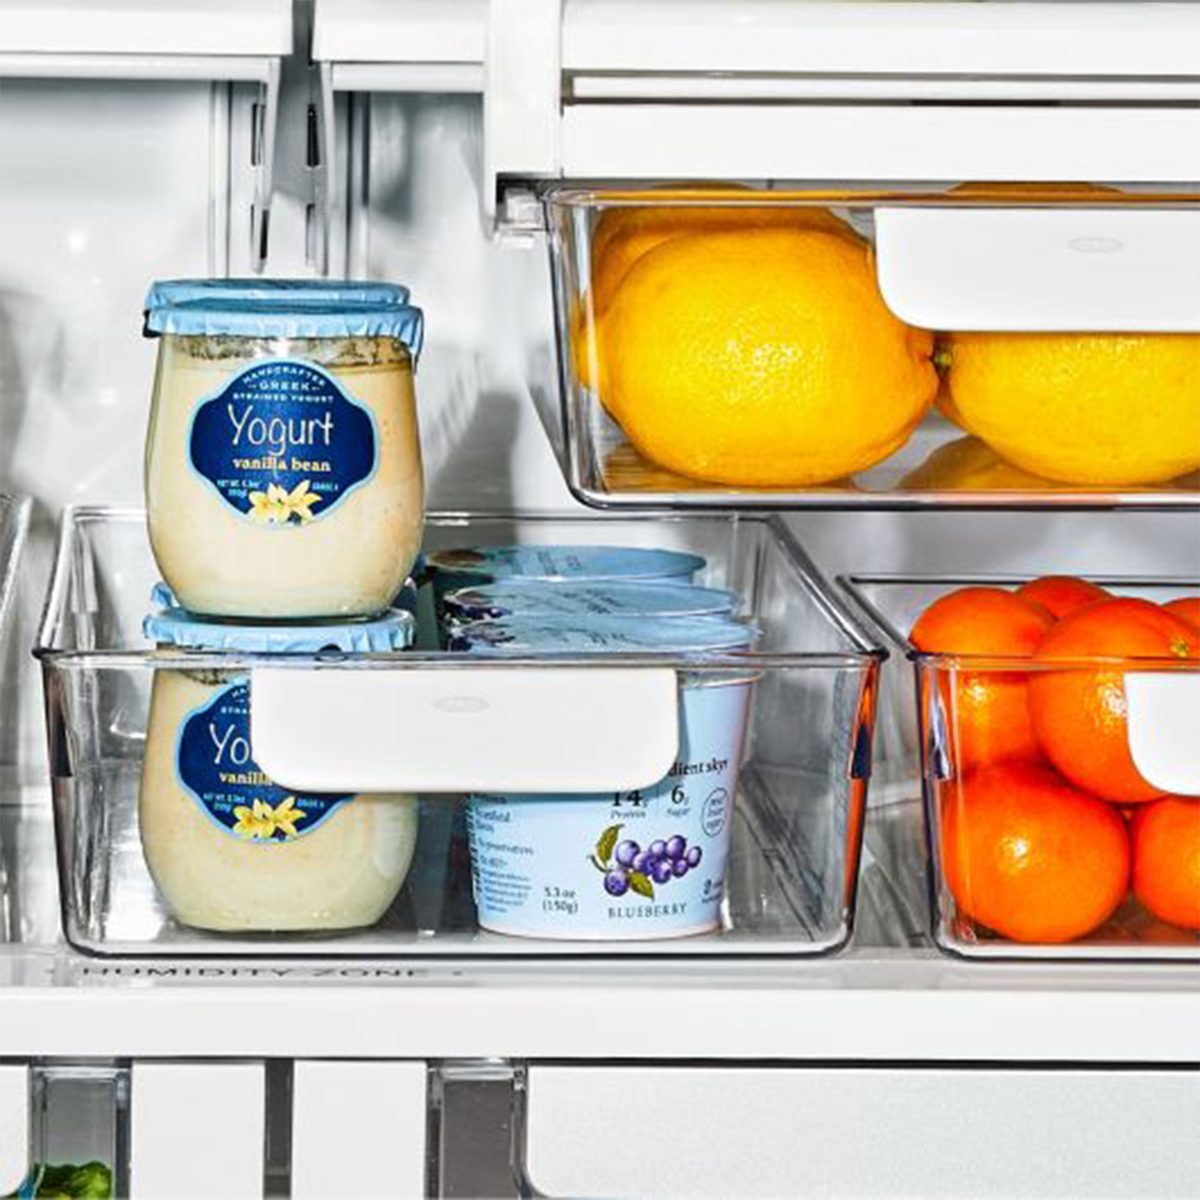 https://www.tasteofhome.com/wp-content/uploads/2023/04/OXO-Launched-a-Fridge-Organization-Line%E2%80%94Prices-Start-at-Just-12_FT_via-amazon.com_.jpg